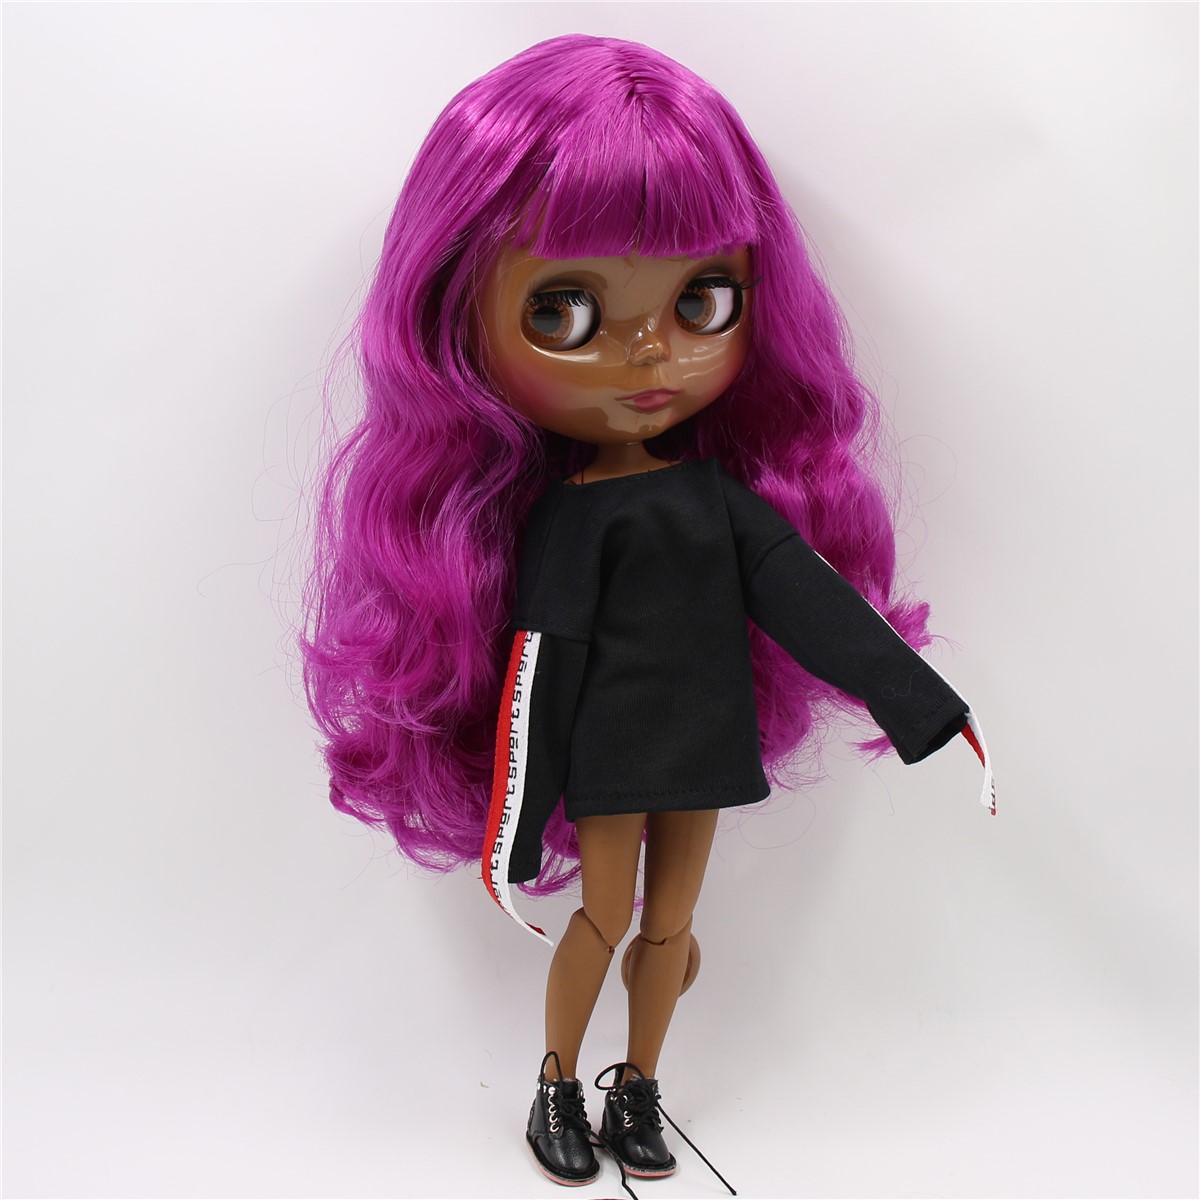 Neo Blythe Doll with Pink Hair, Black skin, Shiny Face & Jointed Body Black Skin Nude Blythe Doll Pink Hair Nude Blythe Doll Shiny Face Nude Blythe Doll